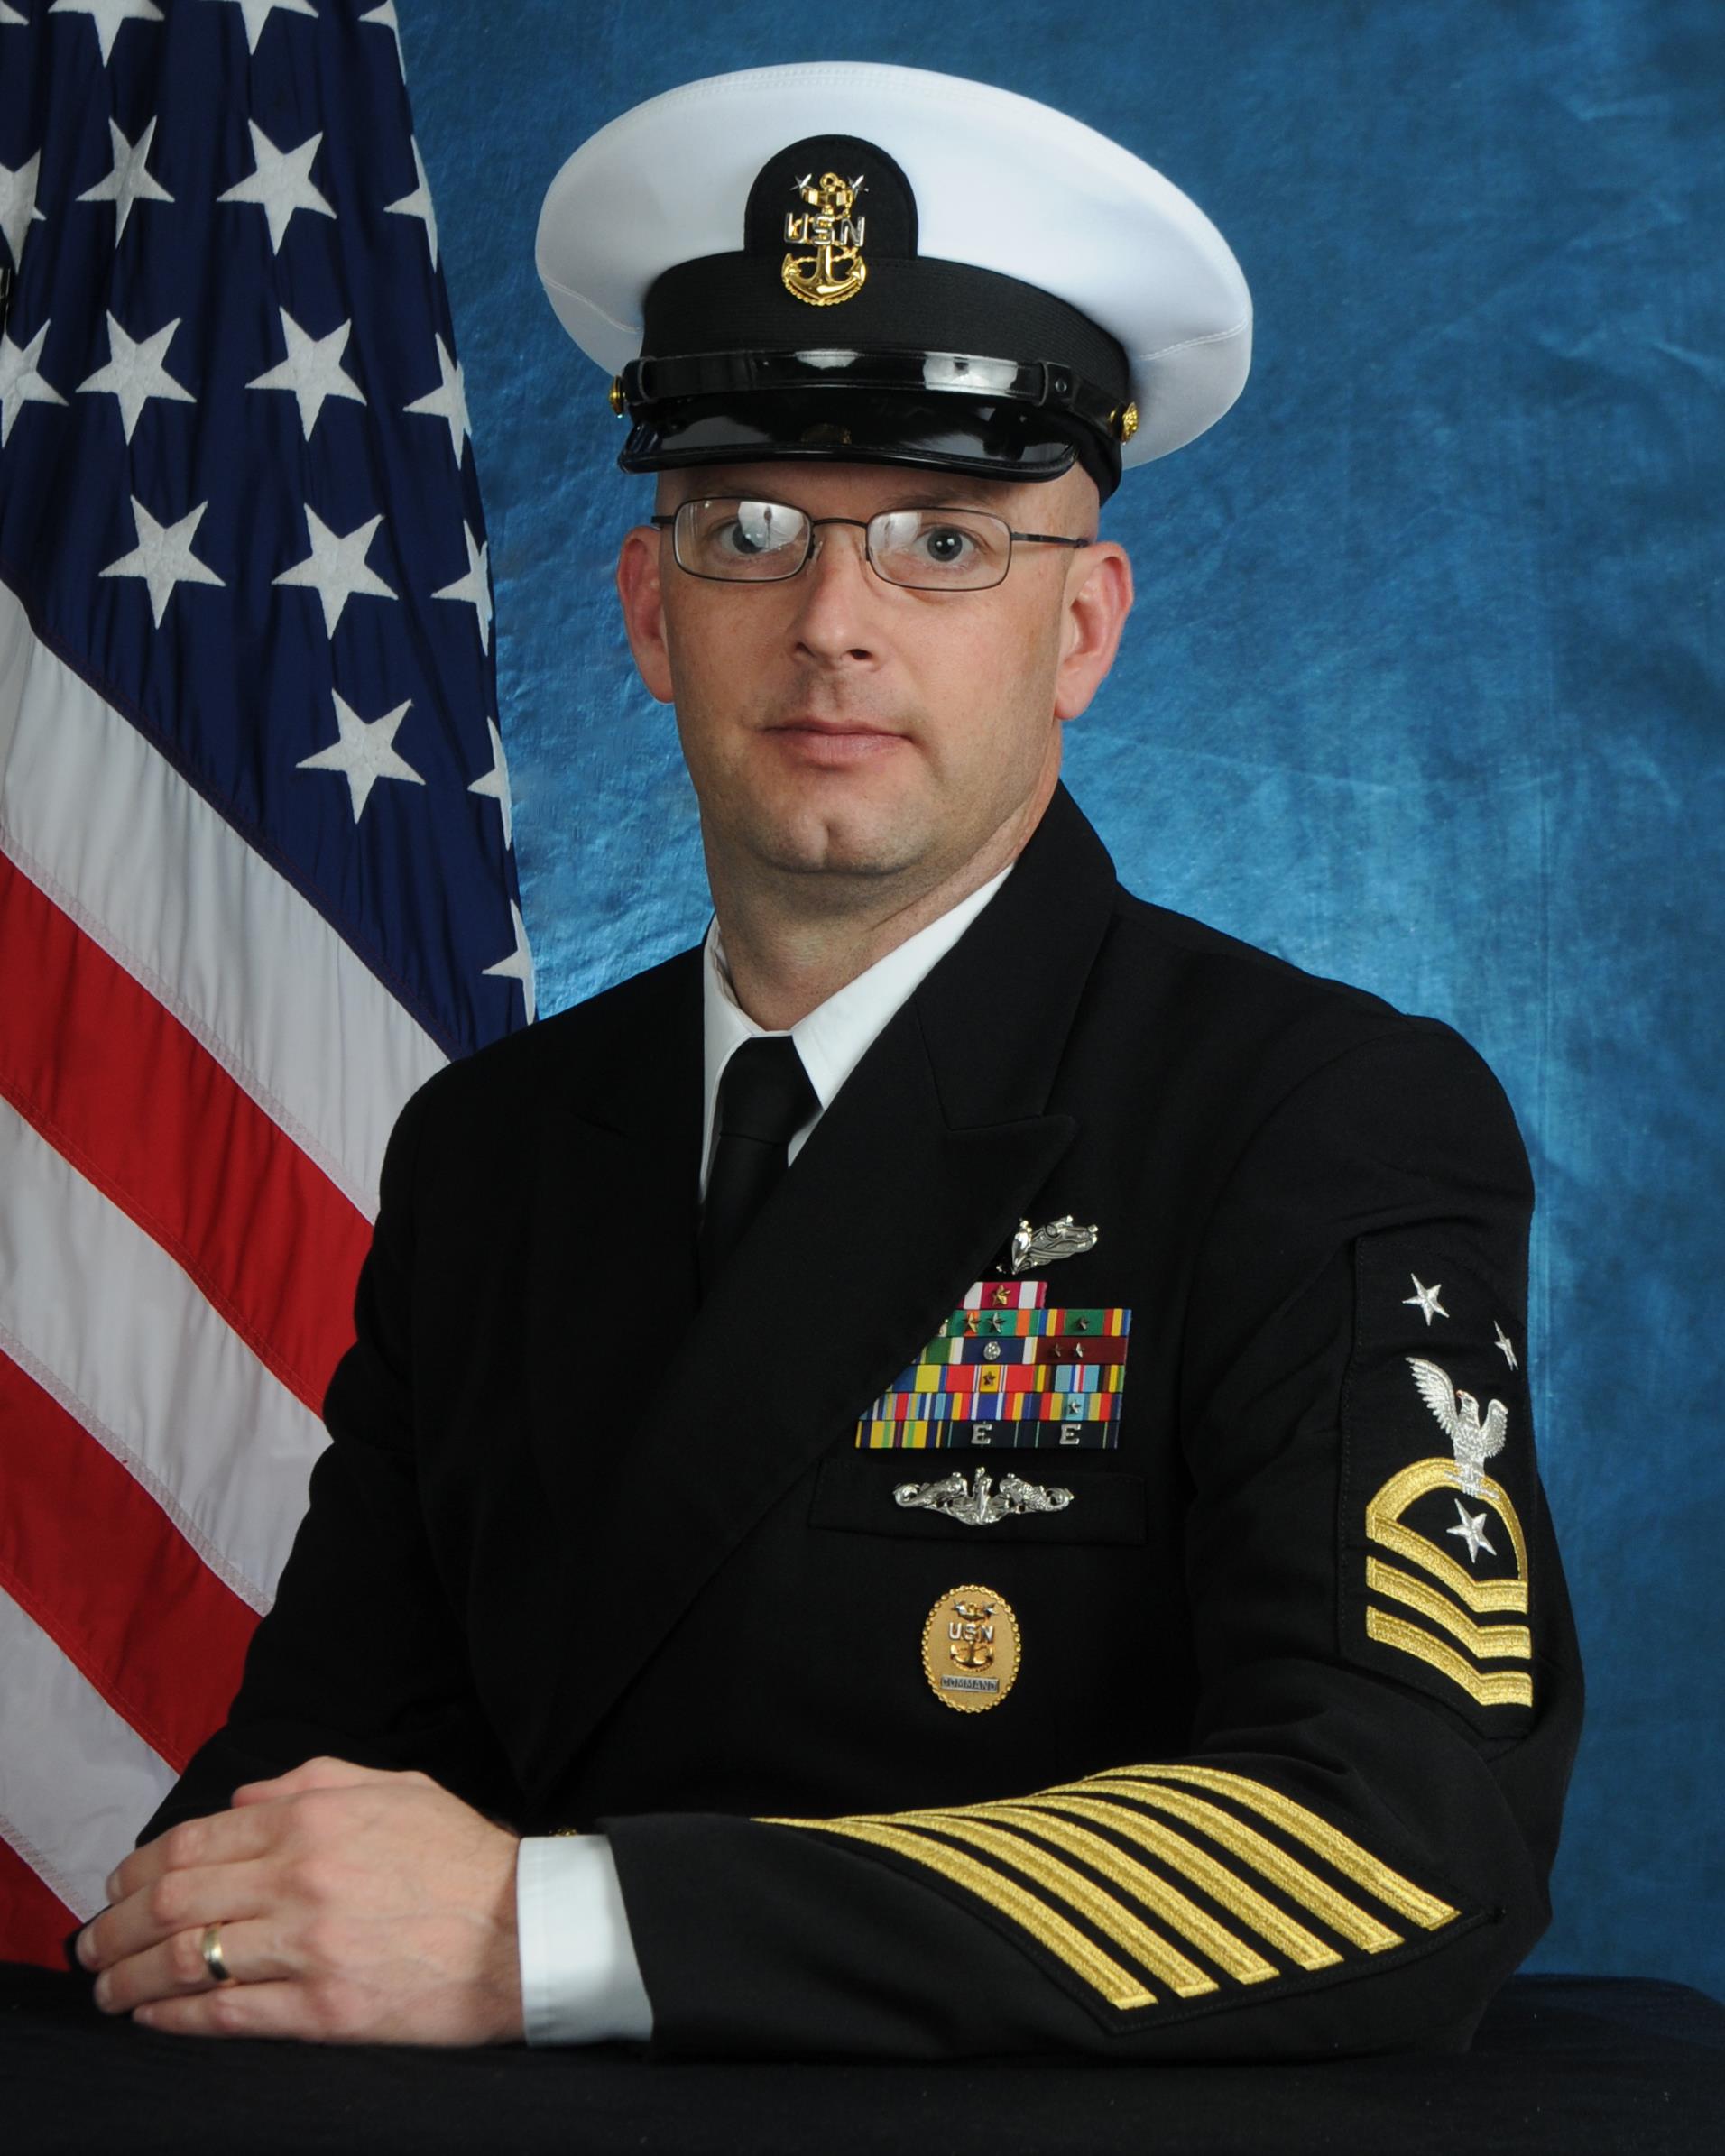 Command master. Us Navy. Navy.mil. "Jonathan messing"+"us Navy". Chief Command.